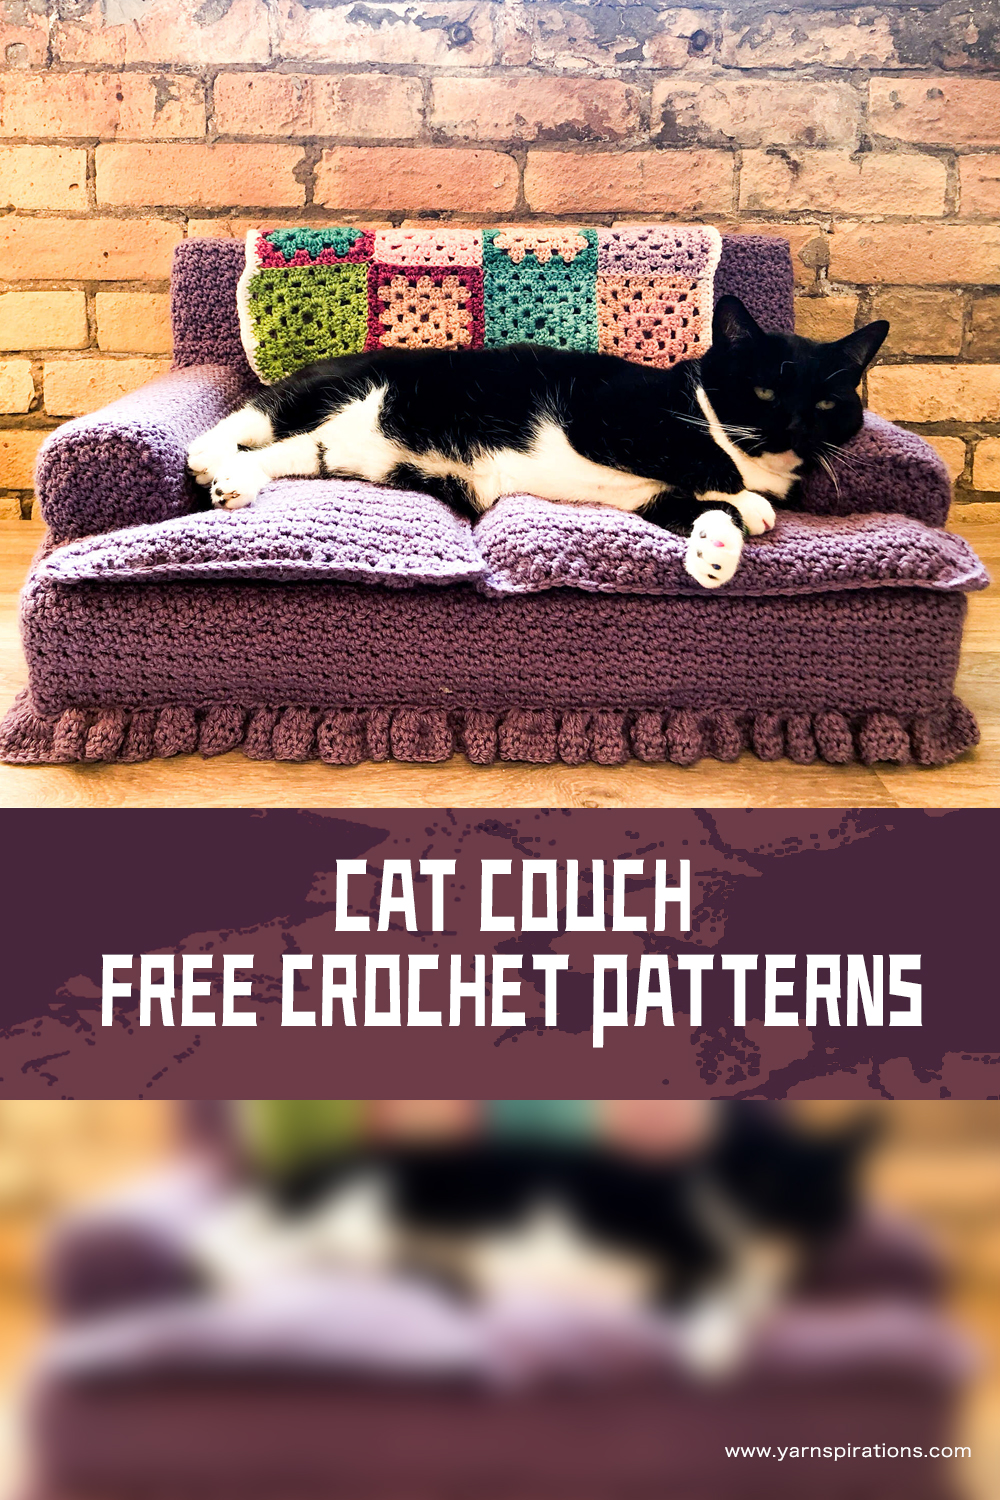 FREE Cat Couch Crochet patterns